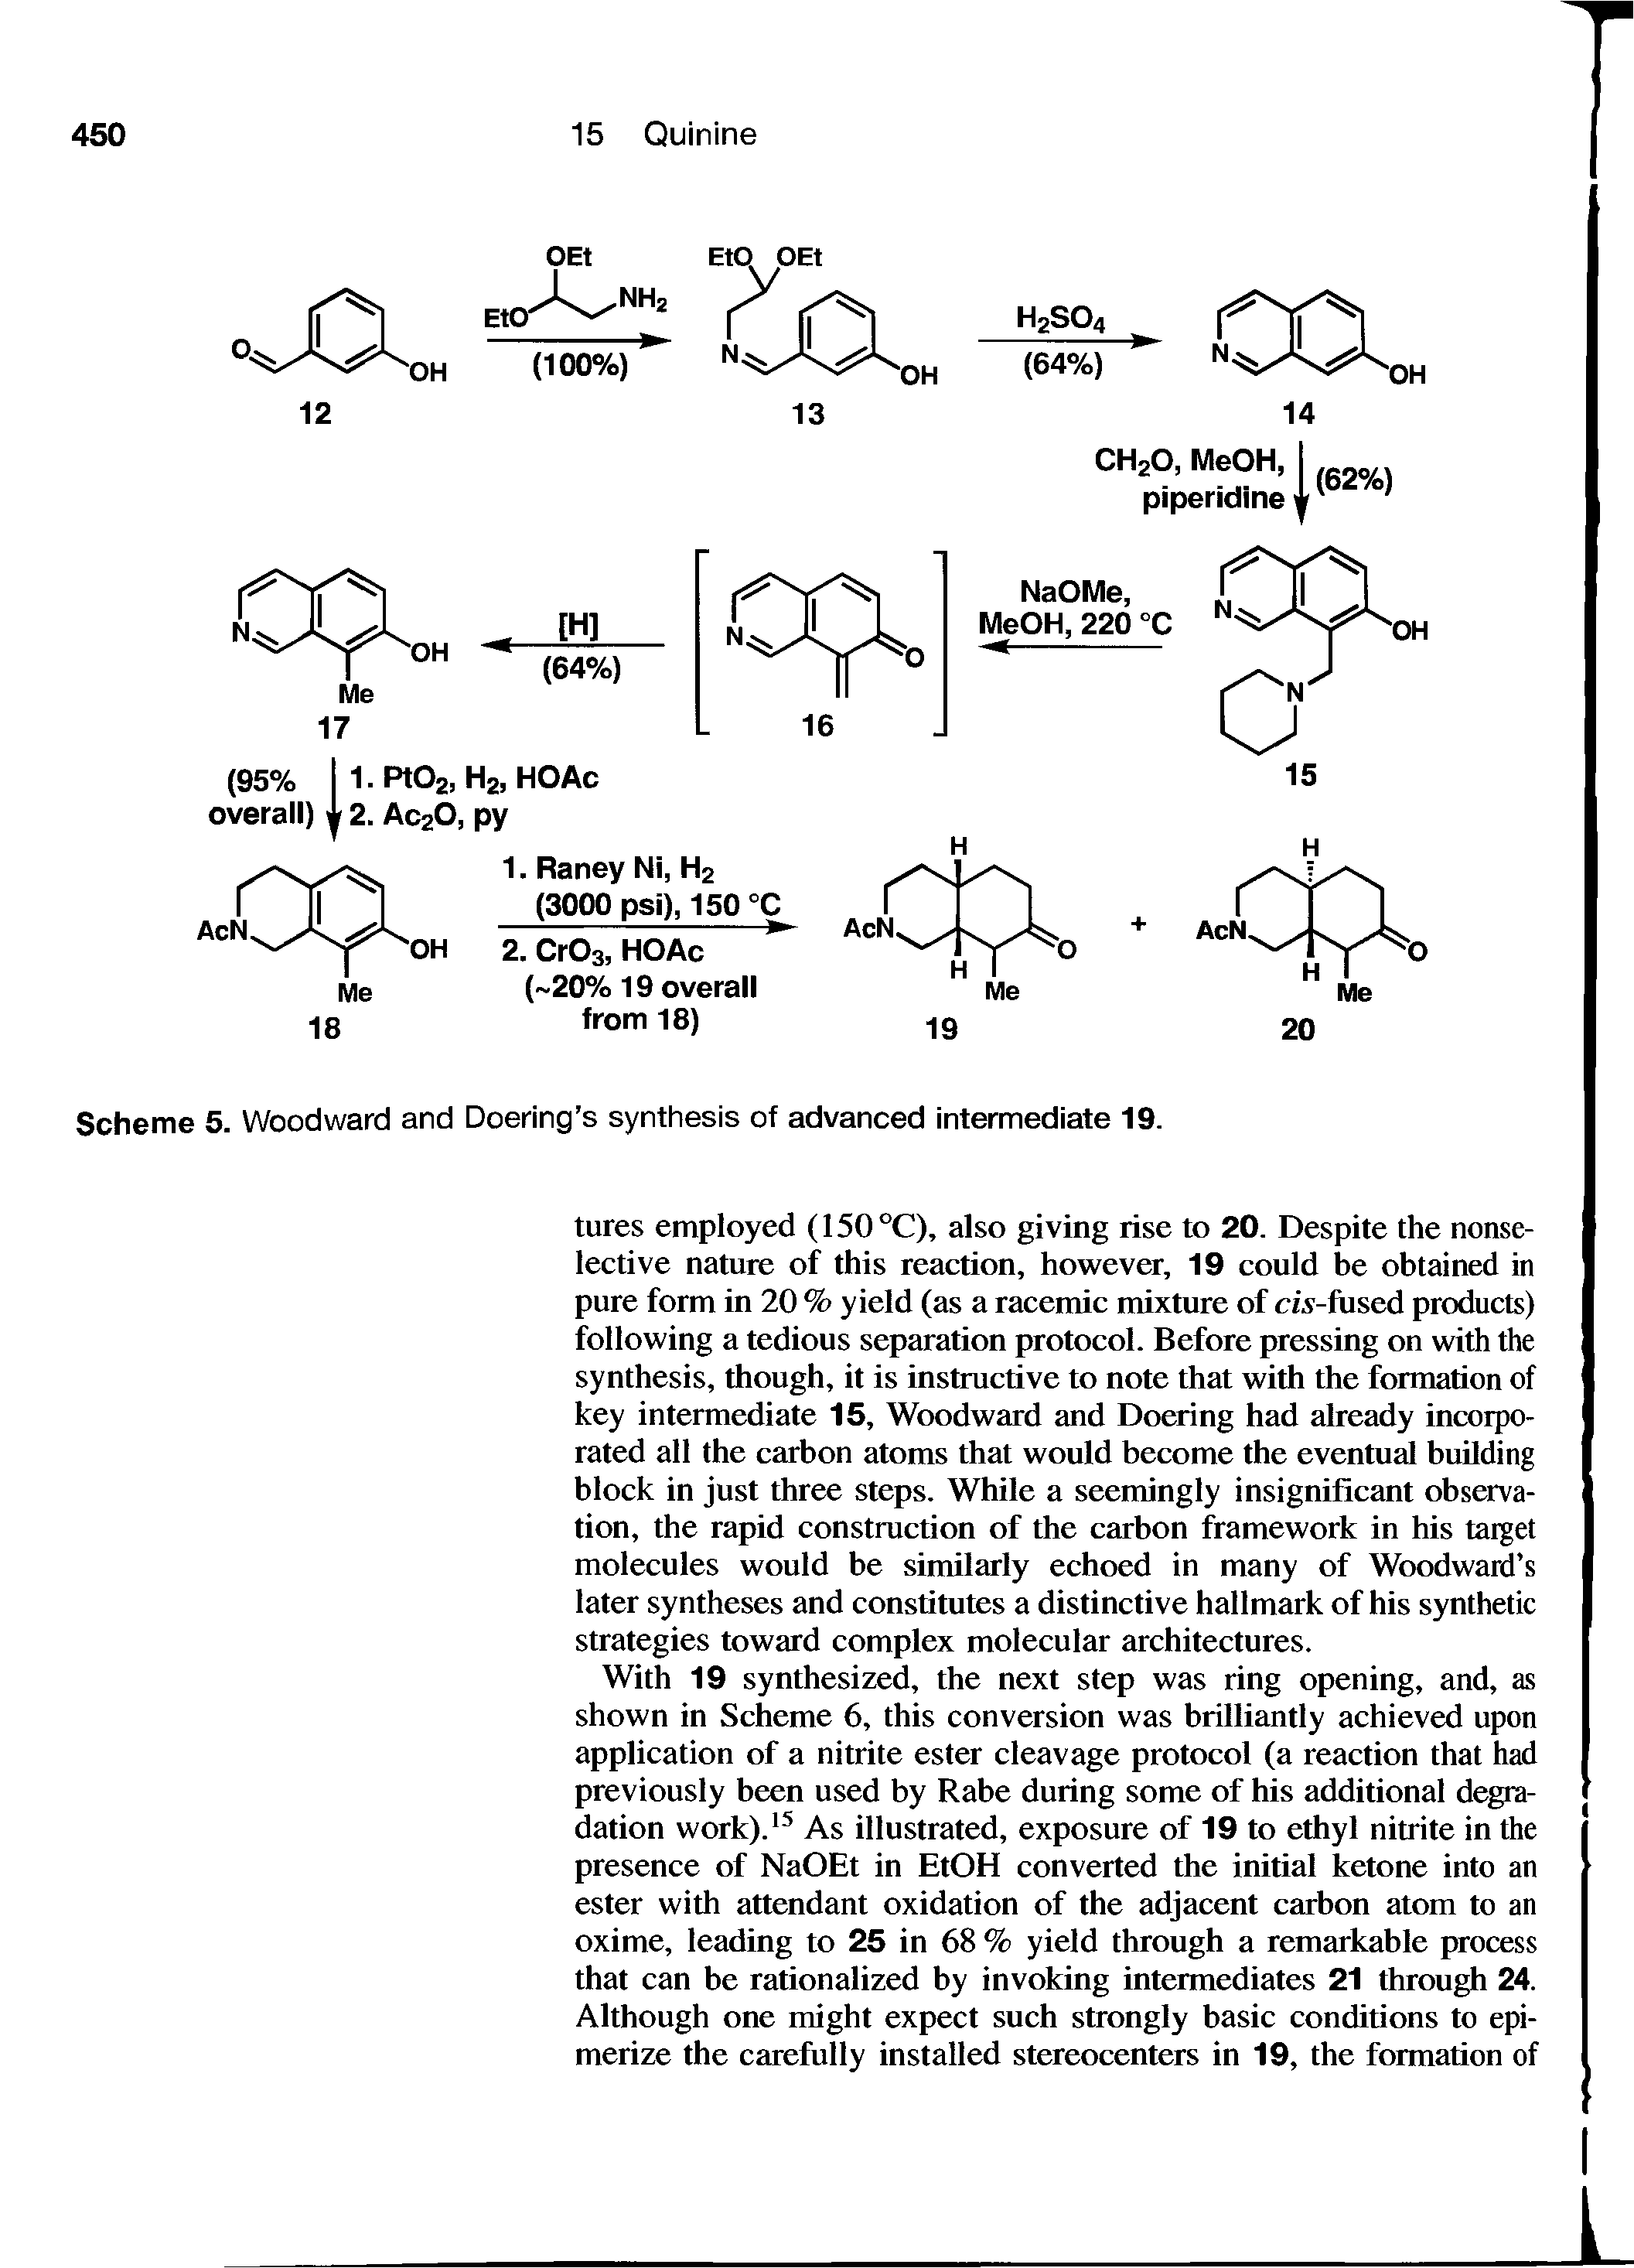 Scheme 5. Woodward and Doering s synthesis of advanoed intermediate 19.